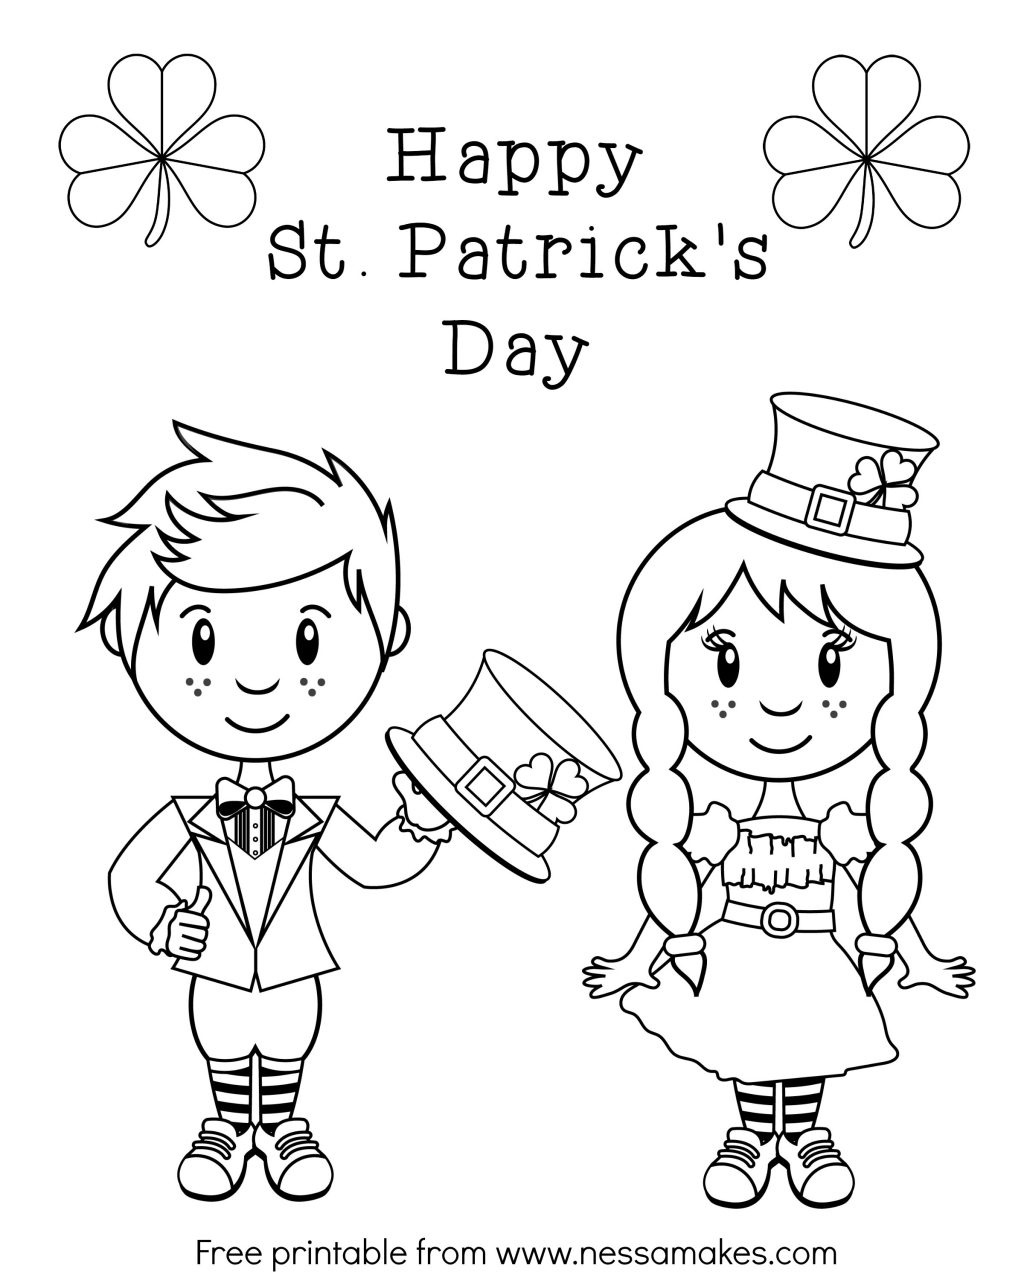 Coloring Pages ~ Coloring Pages Stks Sheets Free For Dayfree 45 - Free Printable Saint Patrick Coloring Pages